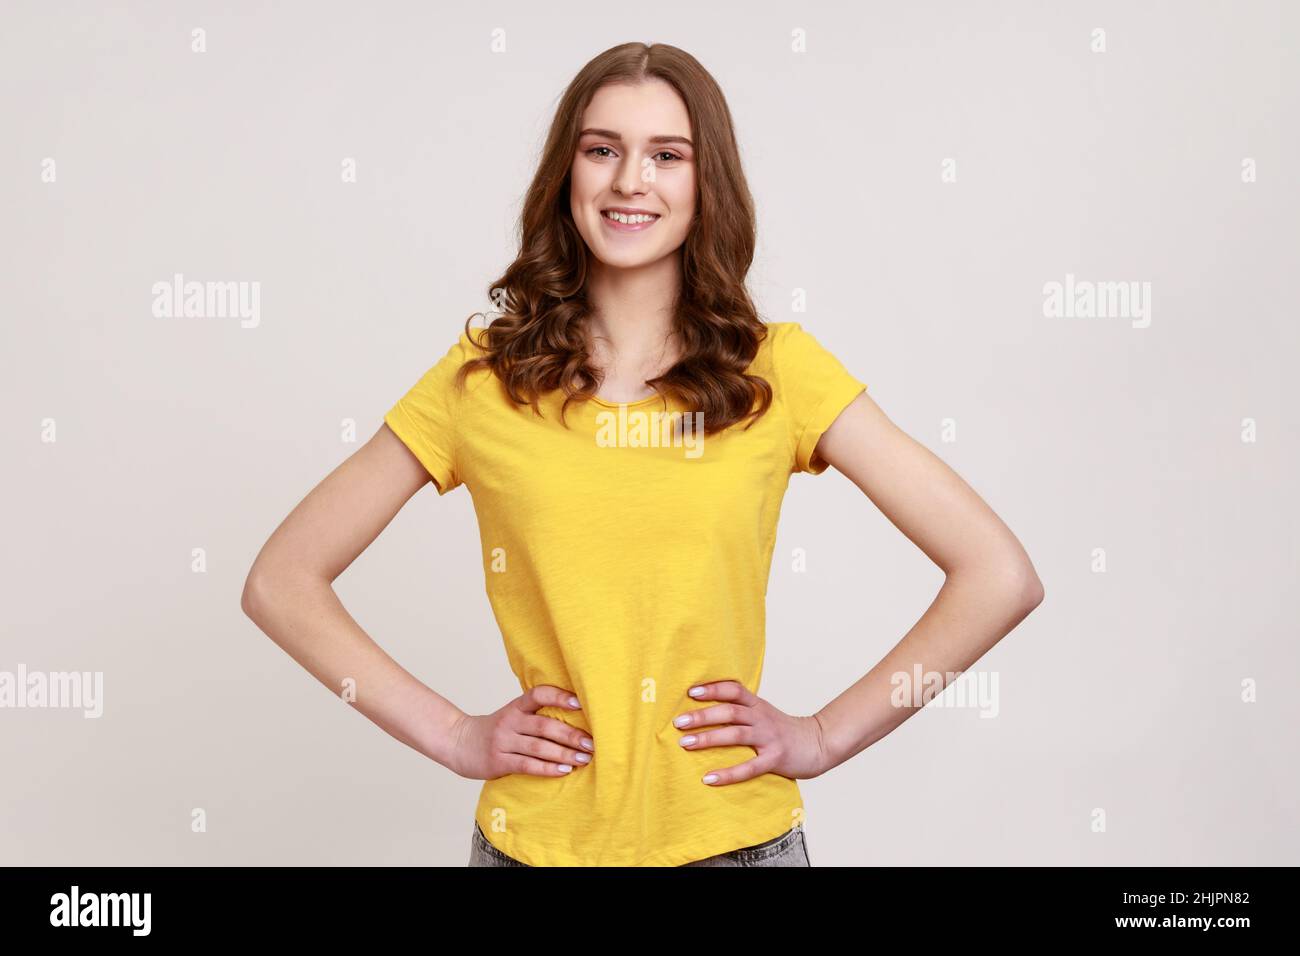 Young female with brown wavy hair posing with hands on hips and looking directly at camera with positive and happy expression, wears yellow T-shirt. Indoor studio shot isolated on gray background. Stock Photo